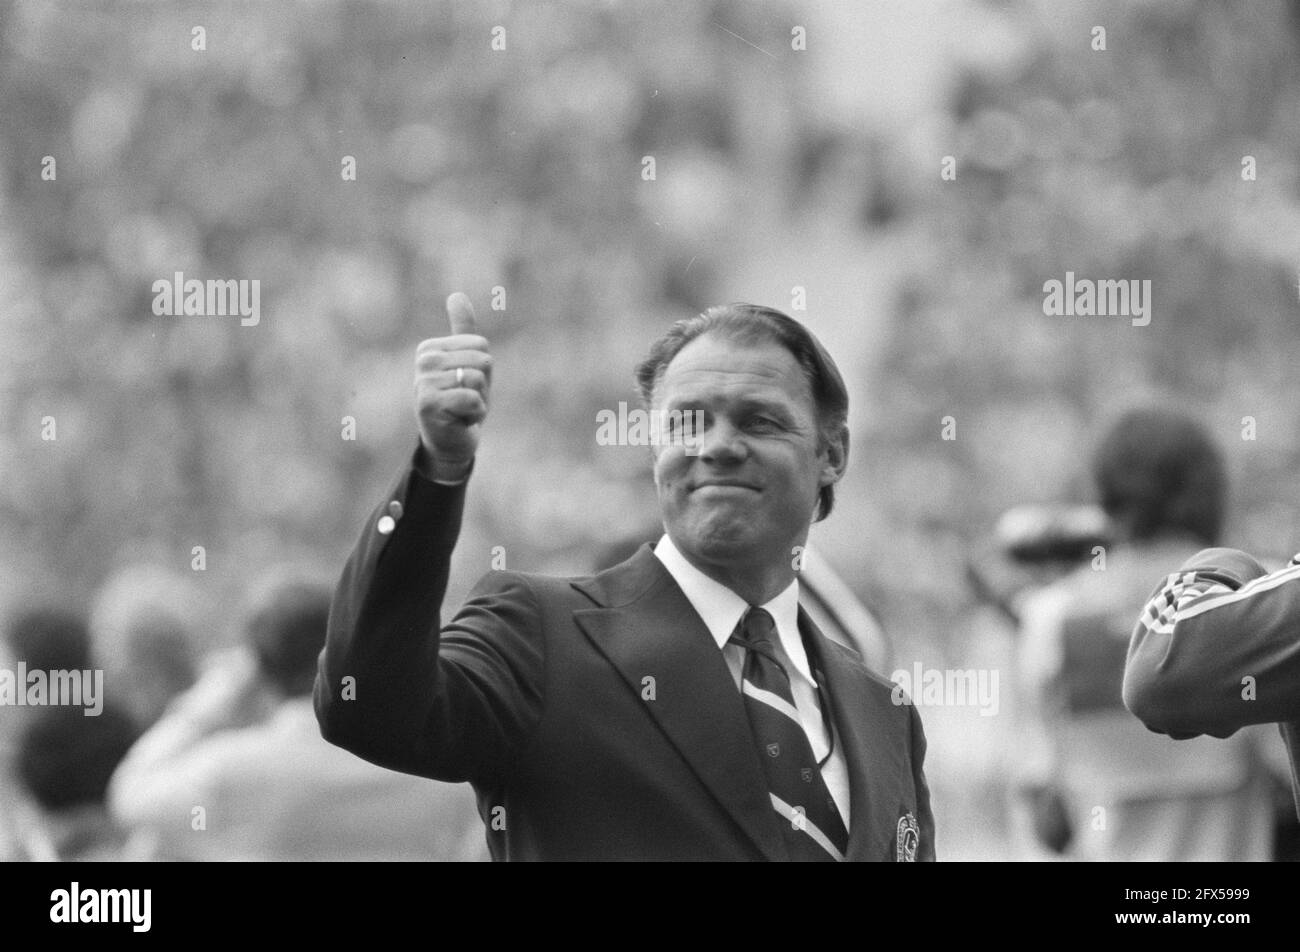 World Cup Final 1974 in Munich, West Germany v. Netherlands 2-1; Rinus Michels with thumb up, July 7, 1974, sports, soccer, The Netherlands, 20th century press agency photo, news to remember, documentary, historic photography 1945-1990, visual stories, human history of the Twentieth Century, capturing moments in time Stock Photo